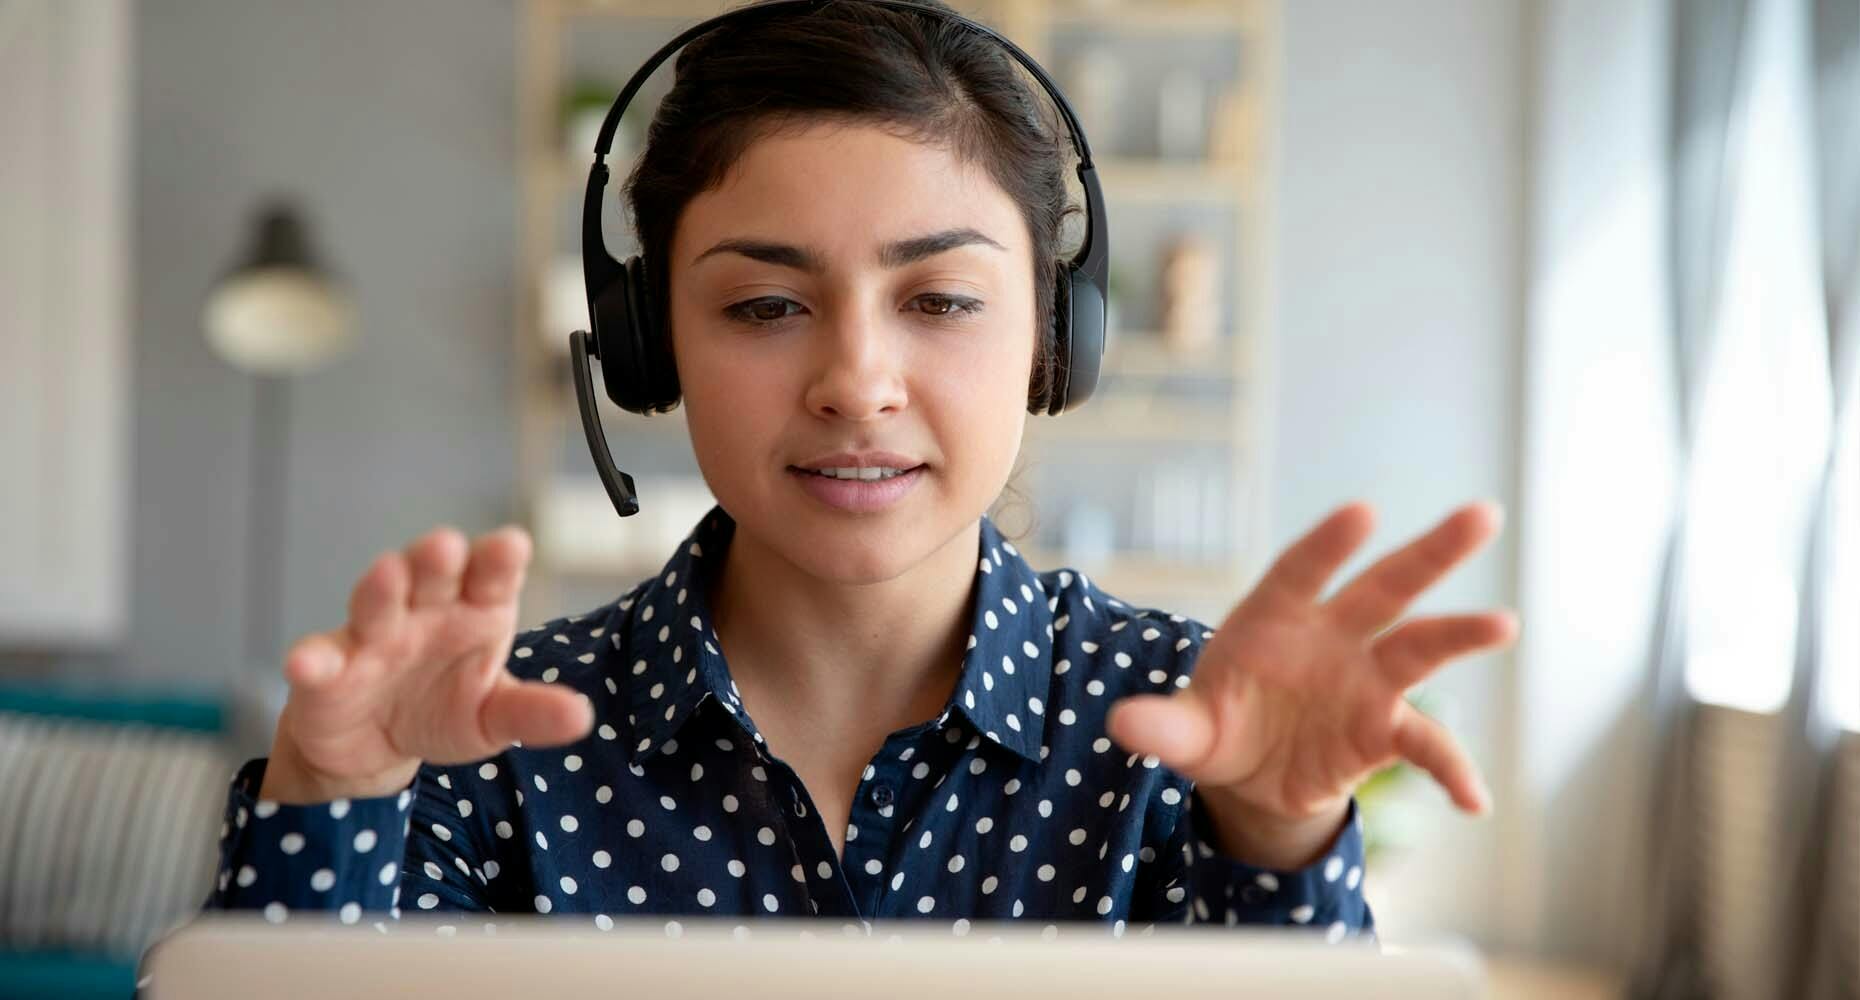 Woman with a headset on gesticulating at her computer screen